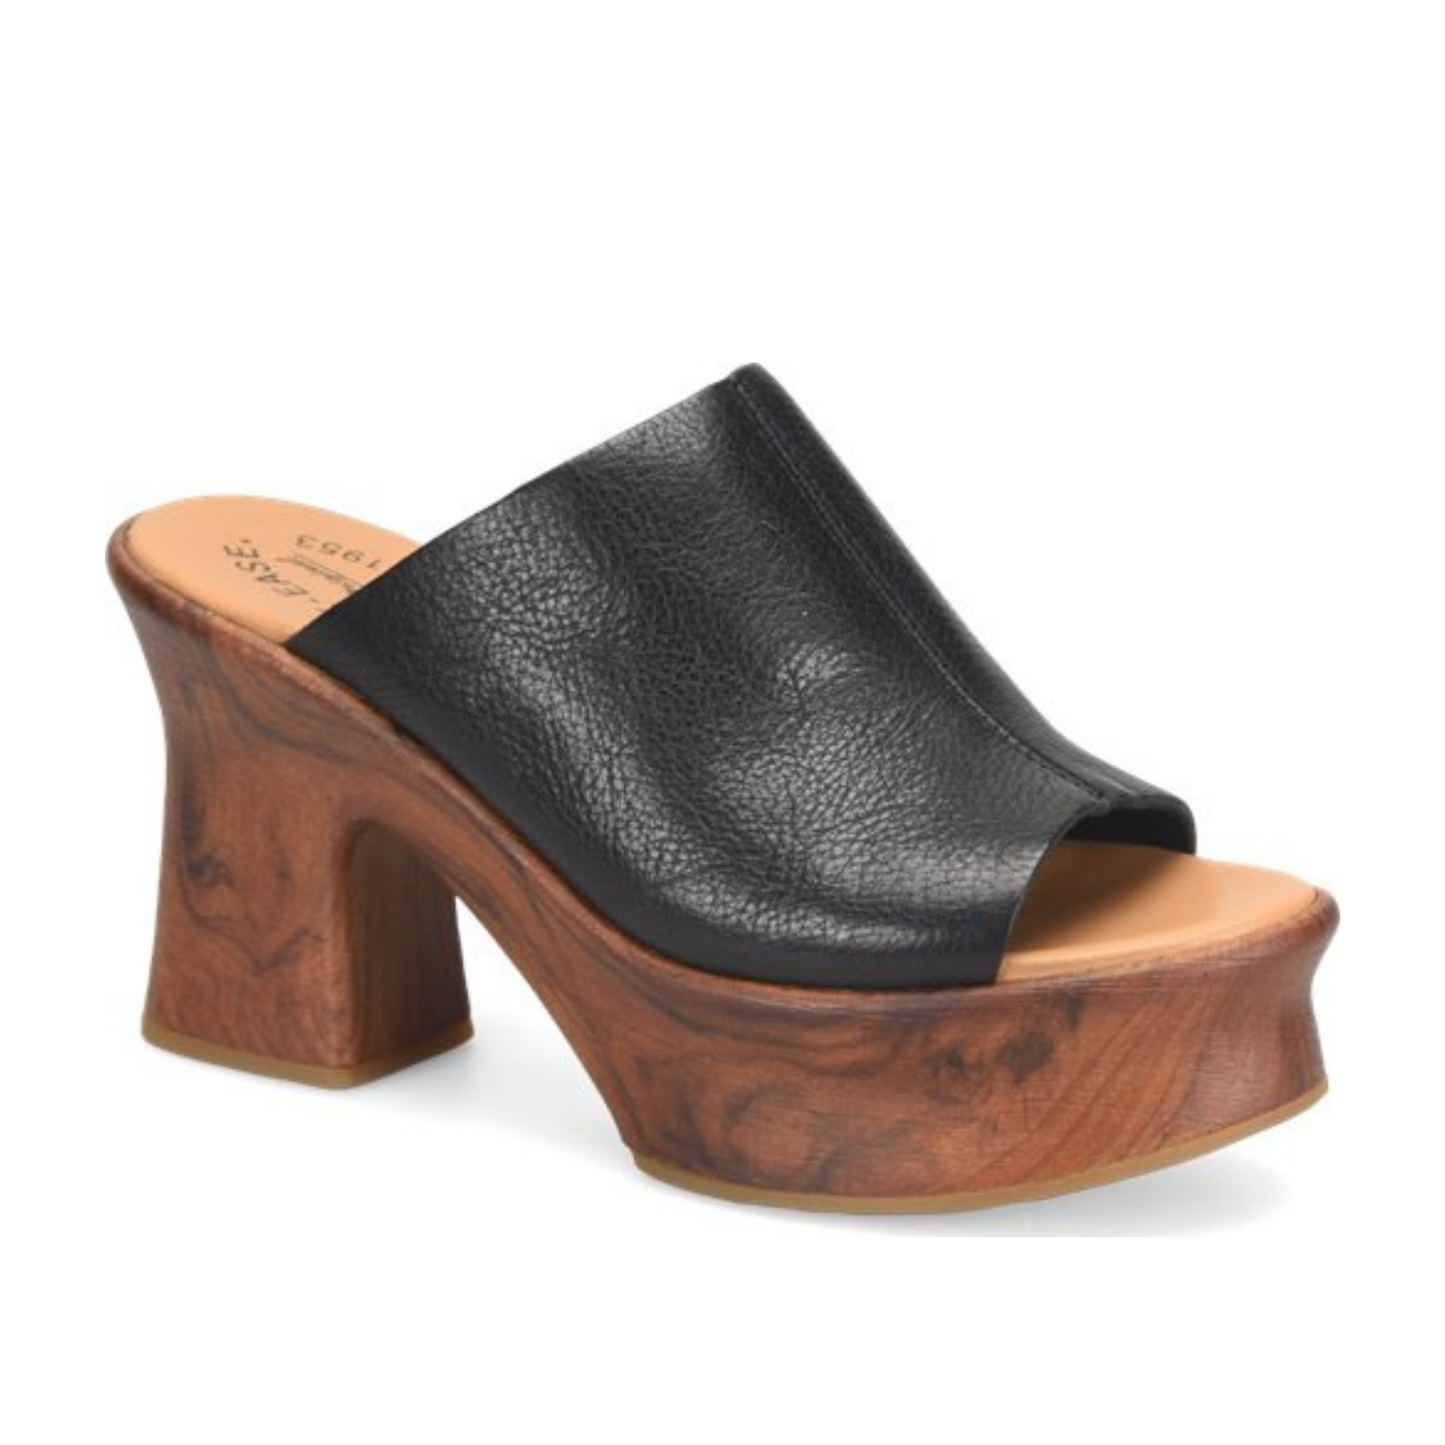 The Kork-Ease Cassia Clog in Black Leather